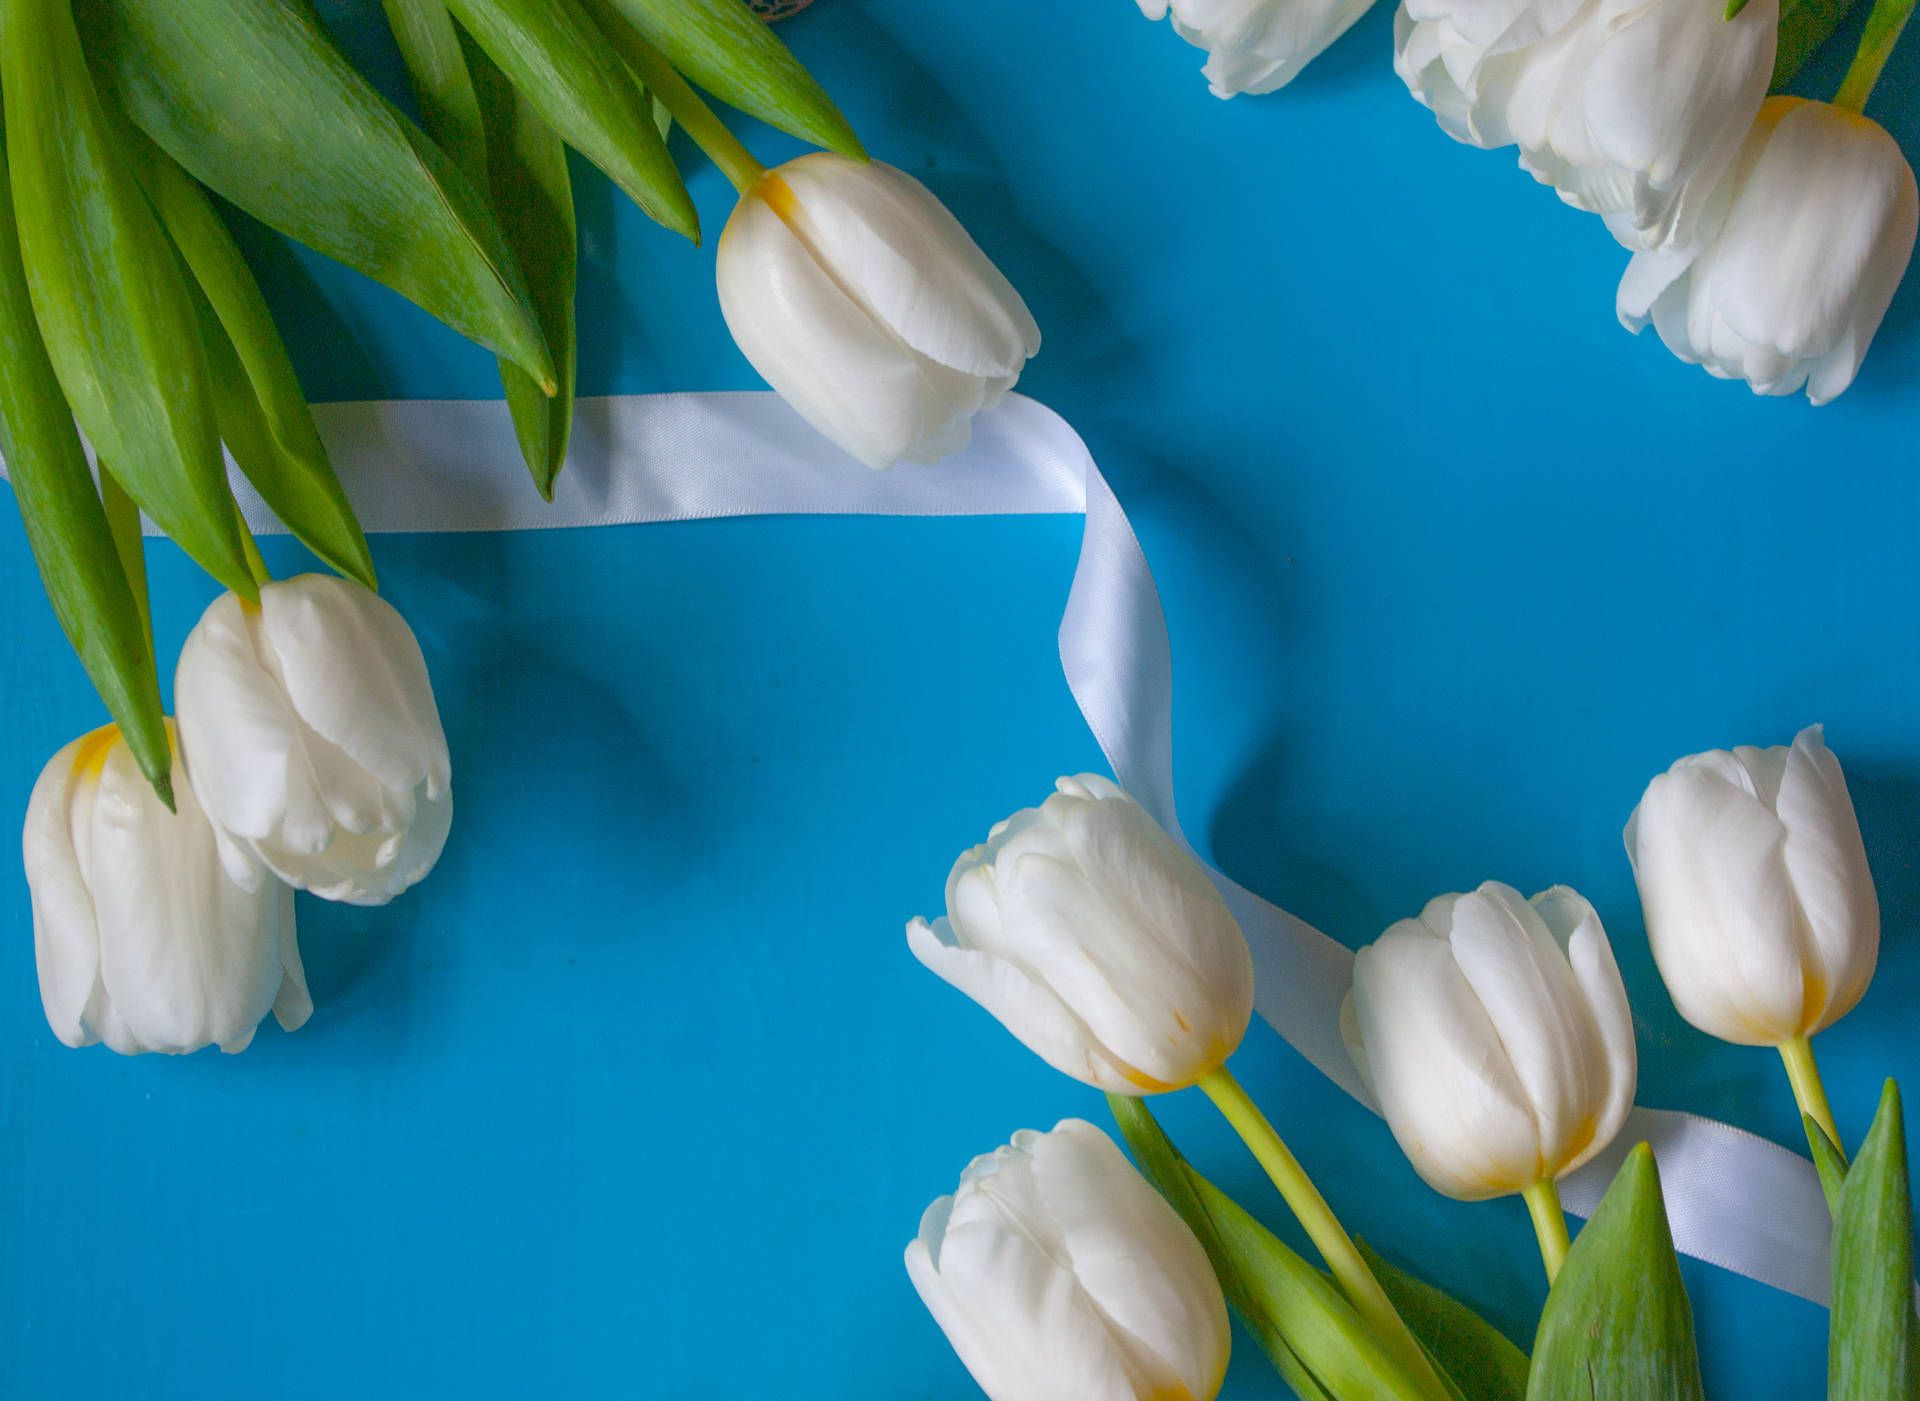 White tulips on a blue background - Tulip